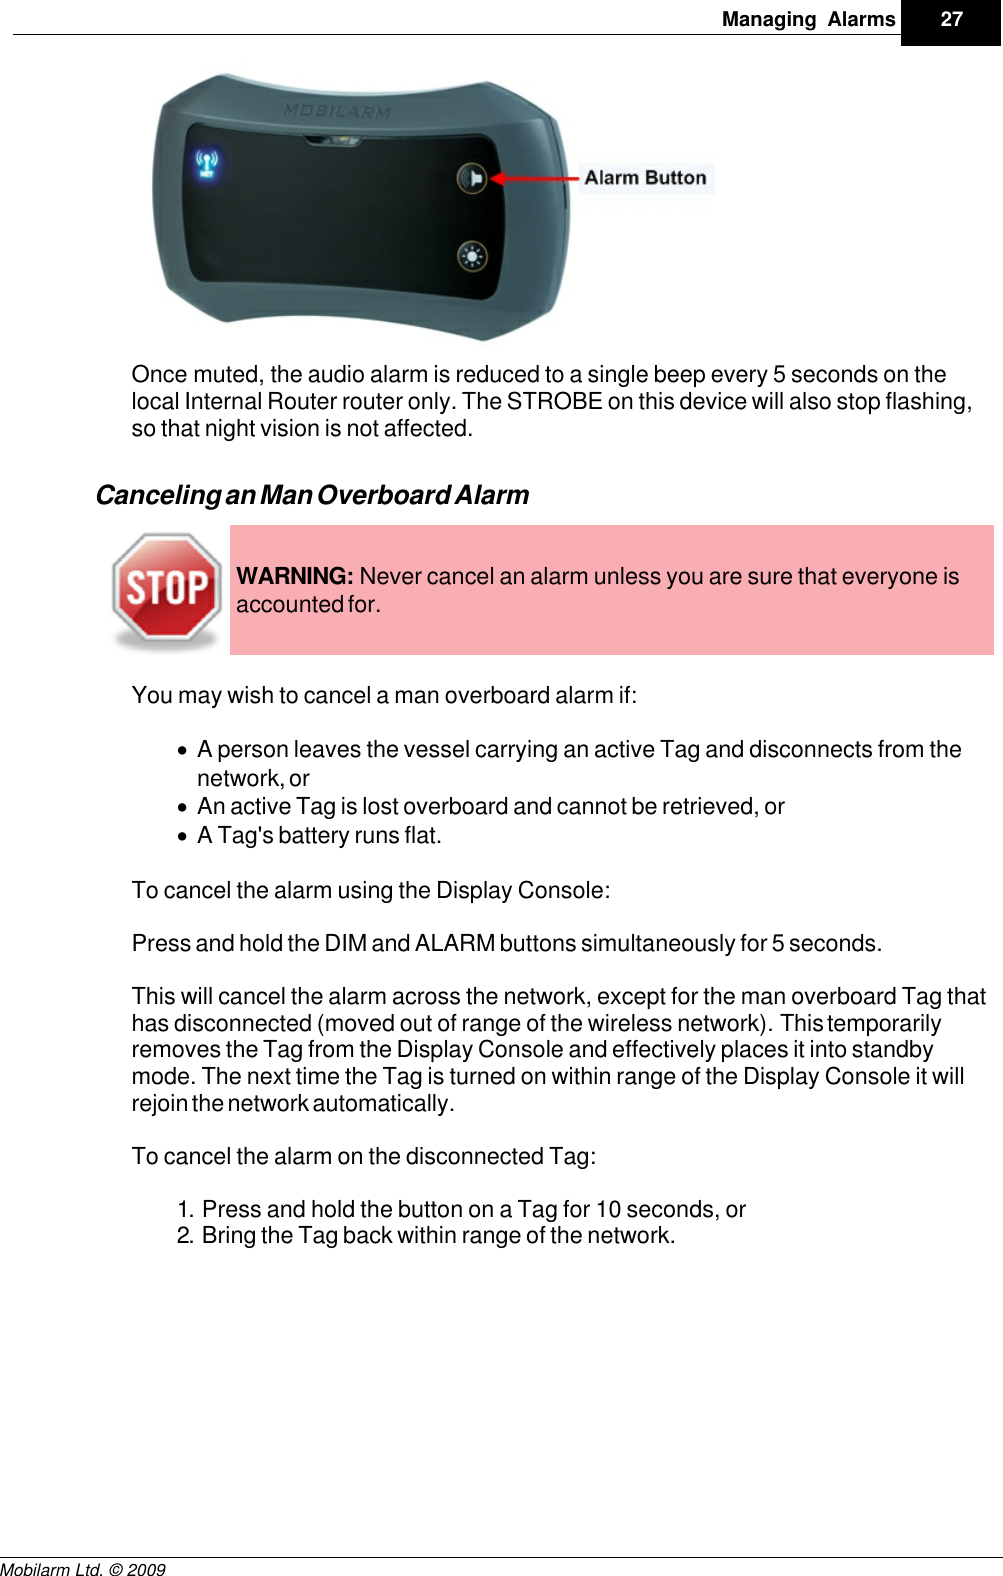 Draft27Managing AlarmsMobilarm Ltd. © 2009Once muted, the audio alarm is reduced to a single beep every 5 seconds on thelocal Internal Router router only. The STROBE on this device will also stop flashing,so that night vision is not affected.Canceling an Man Overboard AlarmWARNING: Never cancel an alarm unless you are sure that everyone isaccounted for.You may wish to cancel a man overboard alarm if:·A person leaves the vessel carrying an active Tag and disconnects from thenetwork, or·An active Tag is lost overboard and cannot be retrieved, or·A Tag&apos;s battery runs flat.To cancel the alarm using the Display Console:Press and hold the DIM and ALARM buttons simultaneously for 5 seconds. This will cancel the alarm across the network, except for the man overboard Tag thathas disconnected (moved out of range of the wireless network). This temporarilyremoves the Tag from the Display Console and effectively places it into standbymode. The next time the Tag is turned on within range of the Display Console it willrejoin the network automatically. To cancel the alarm on the disconnected Tag:1. Press and hold the button on a Tag for 10 seconds, or2. Bring the Tag back within range of the network.